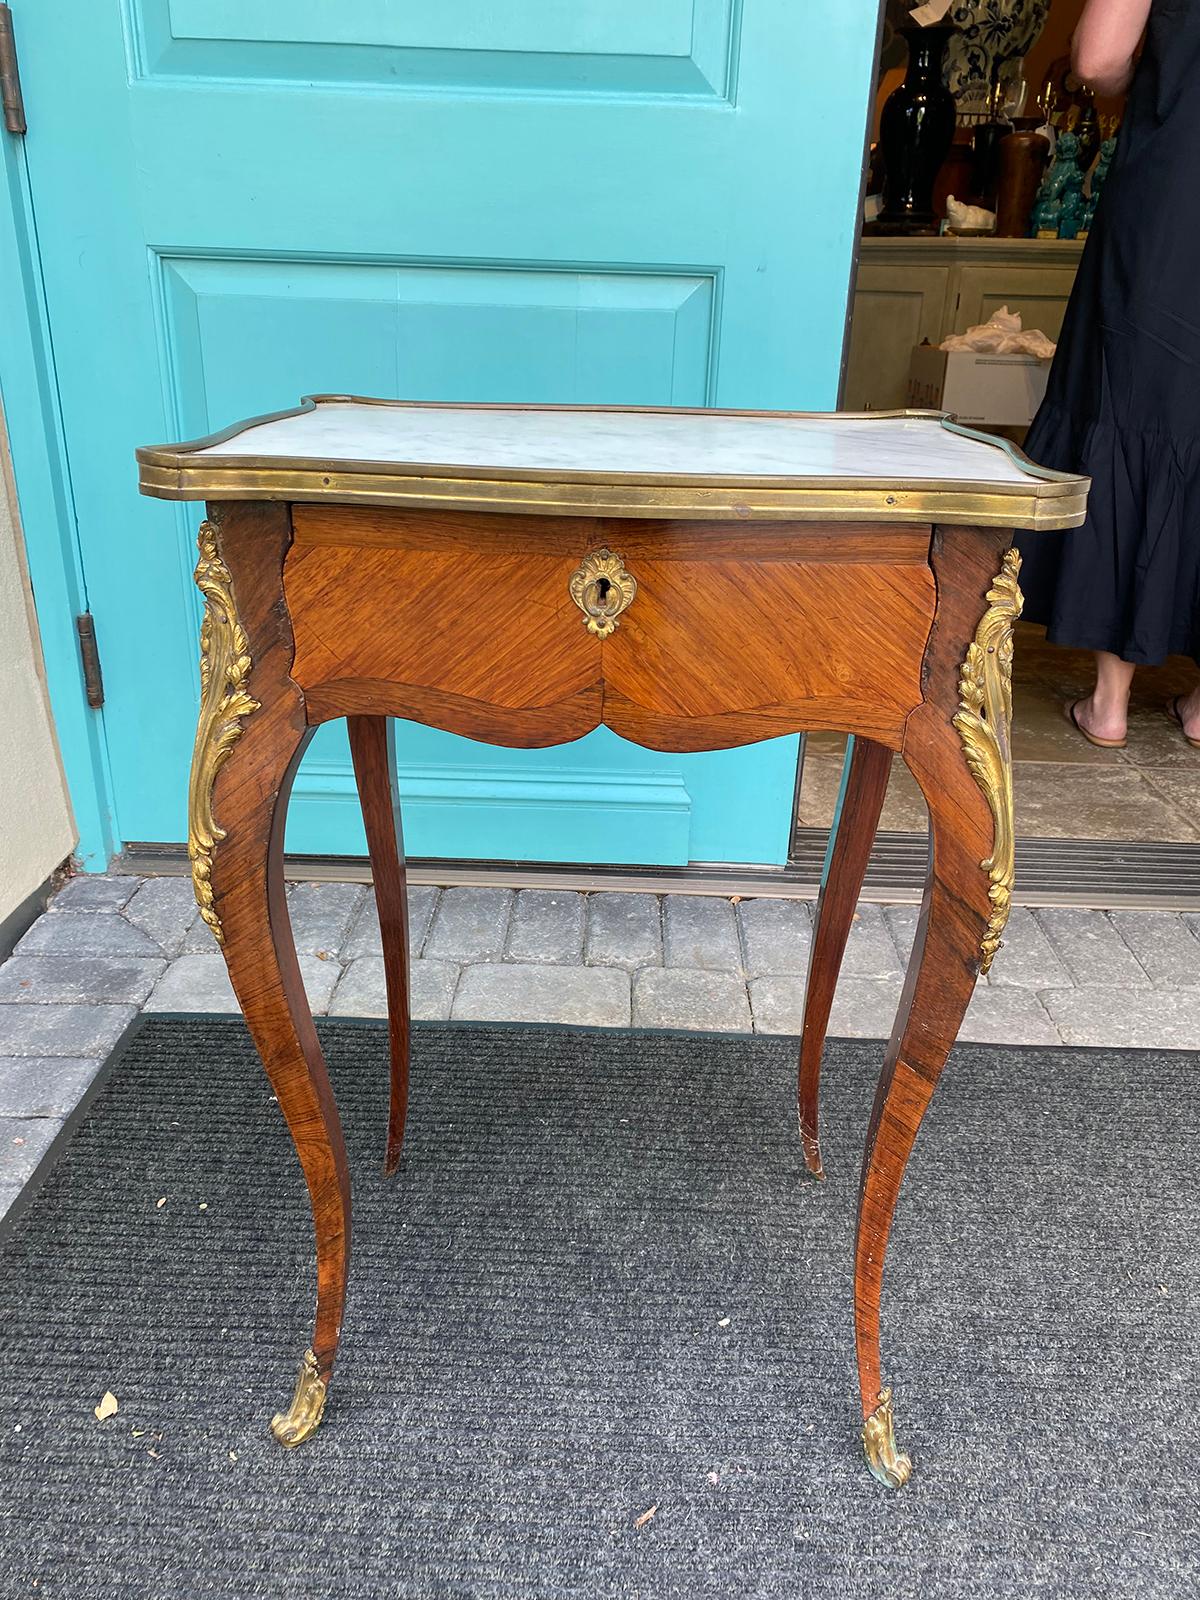 19th century French Ormolu mounted marble top side table, 1 drawer, 1 key, fine quality.